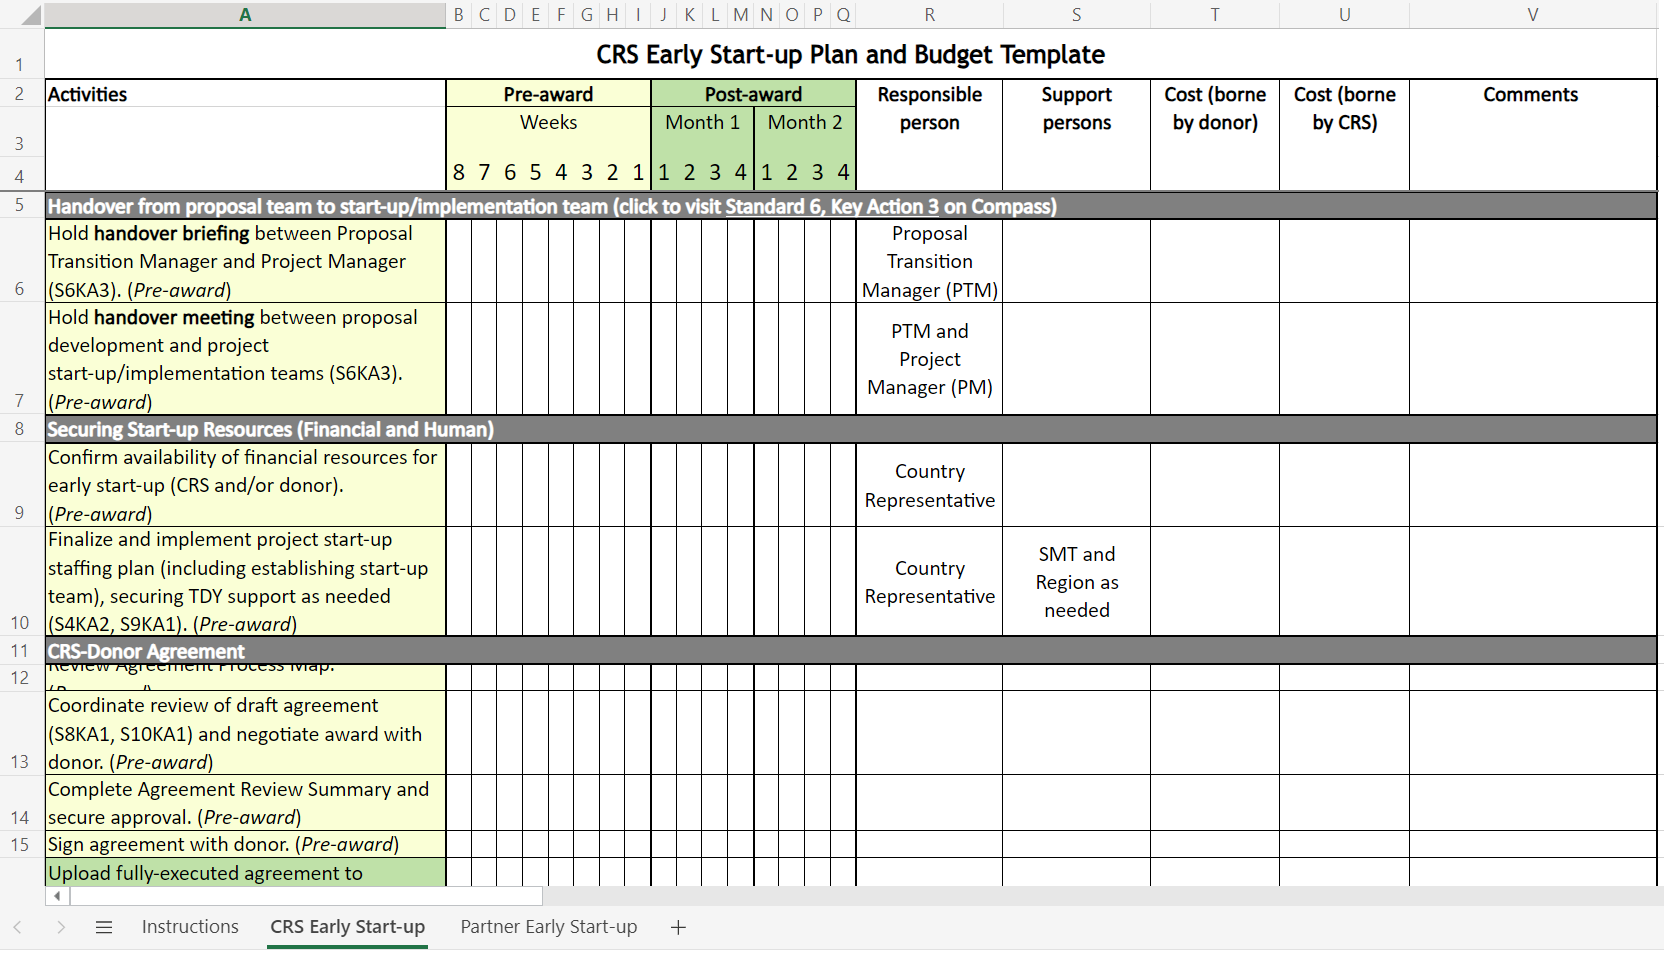 Thumbnail of the early start-up plan and budget spreadsheet